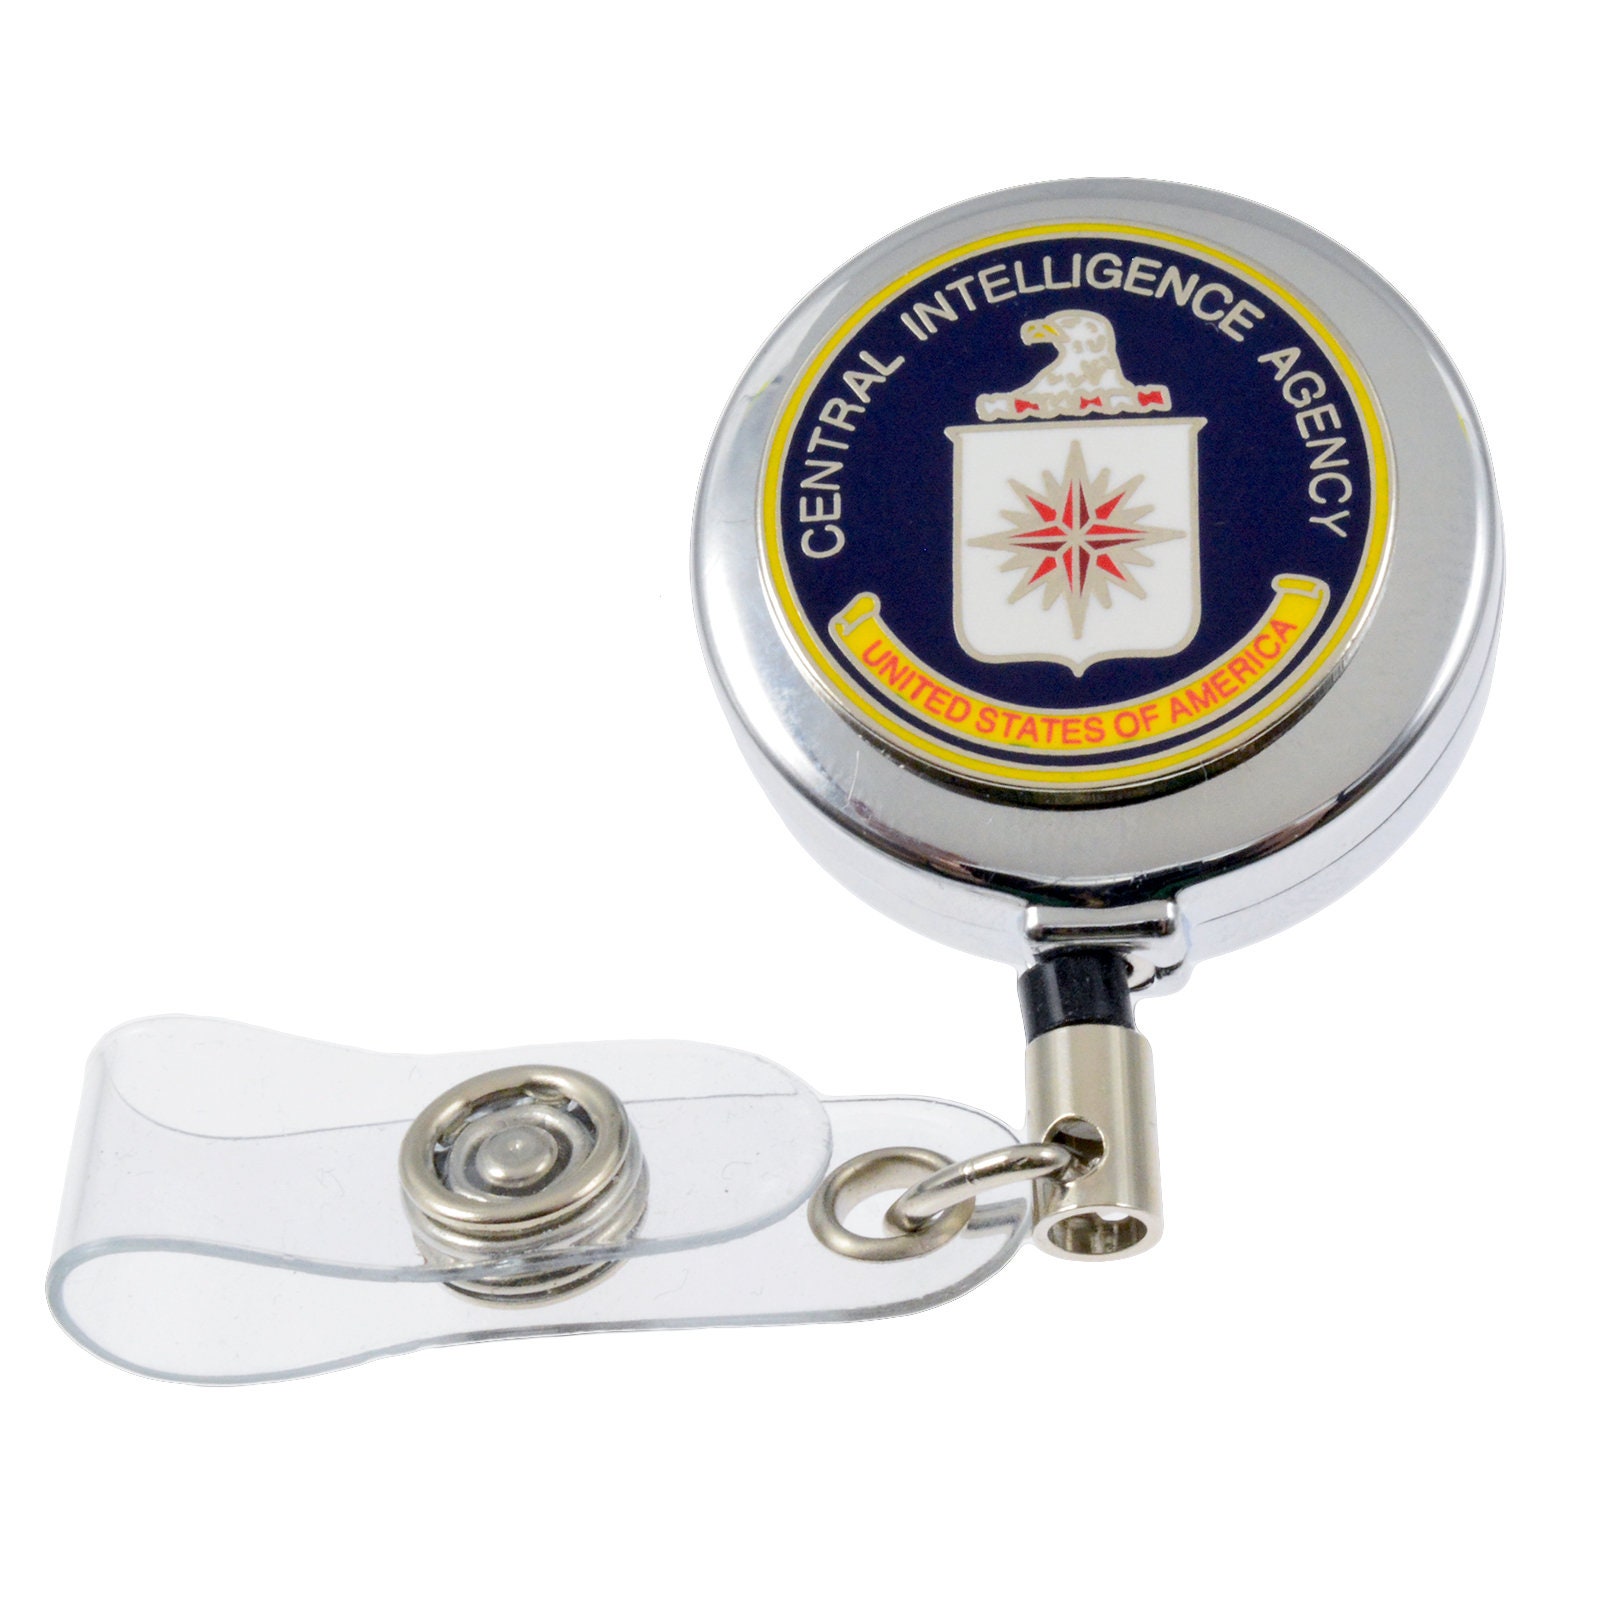 CIA Central Intelligence Security Badge Retractable ID Card Holder